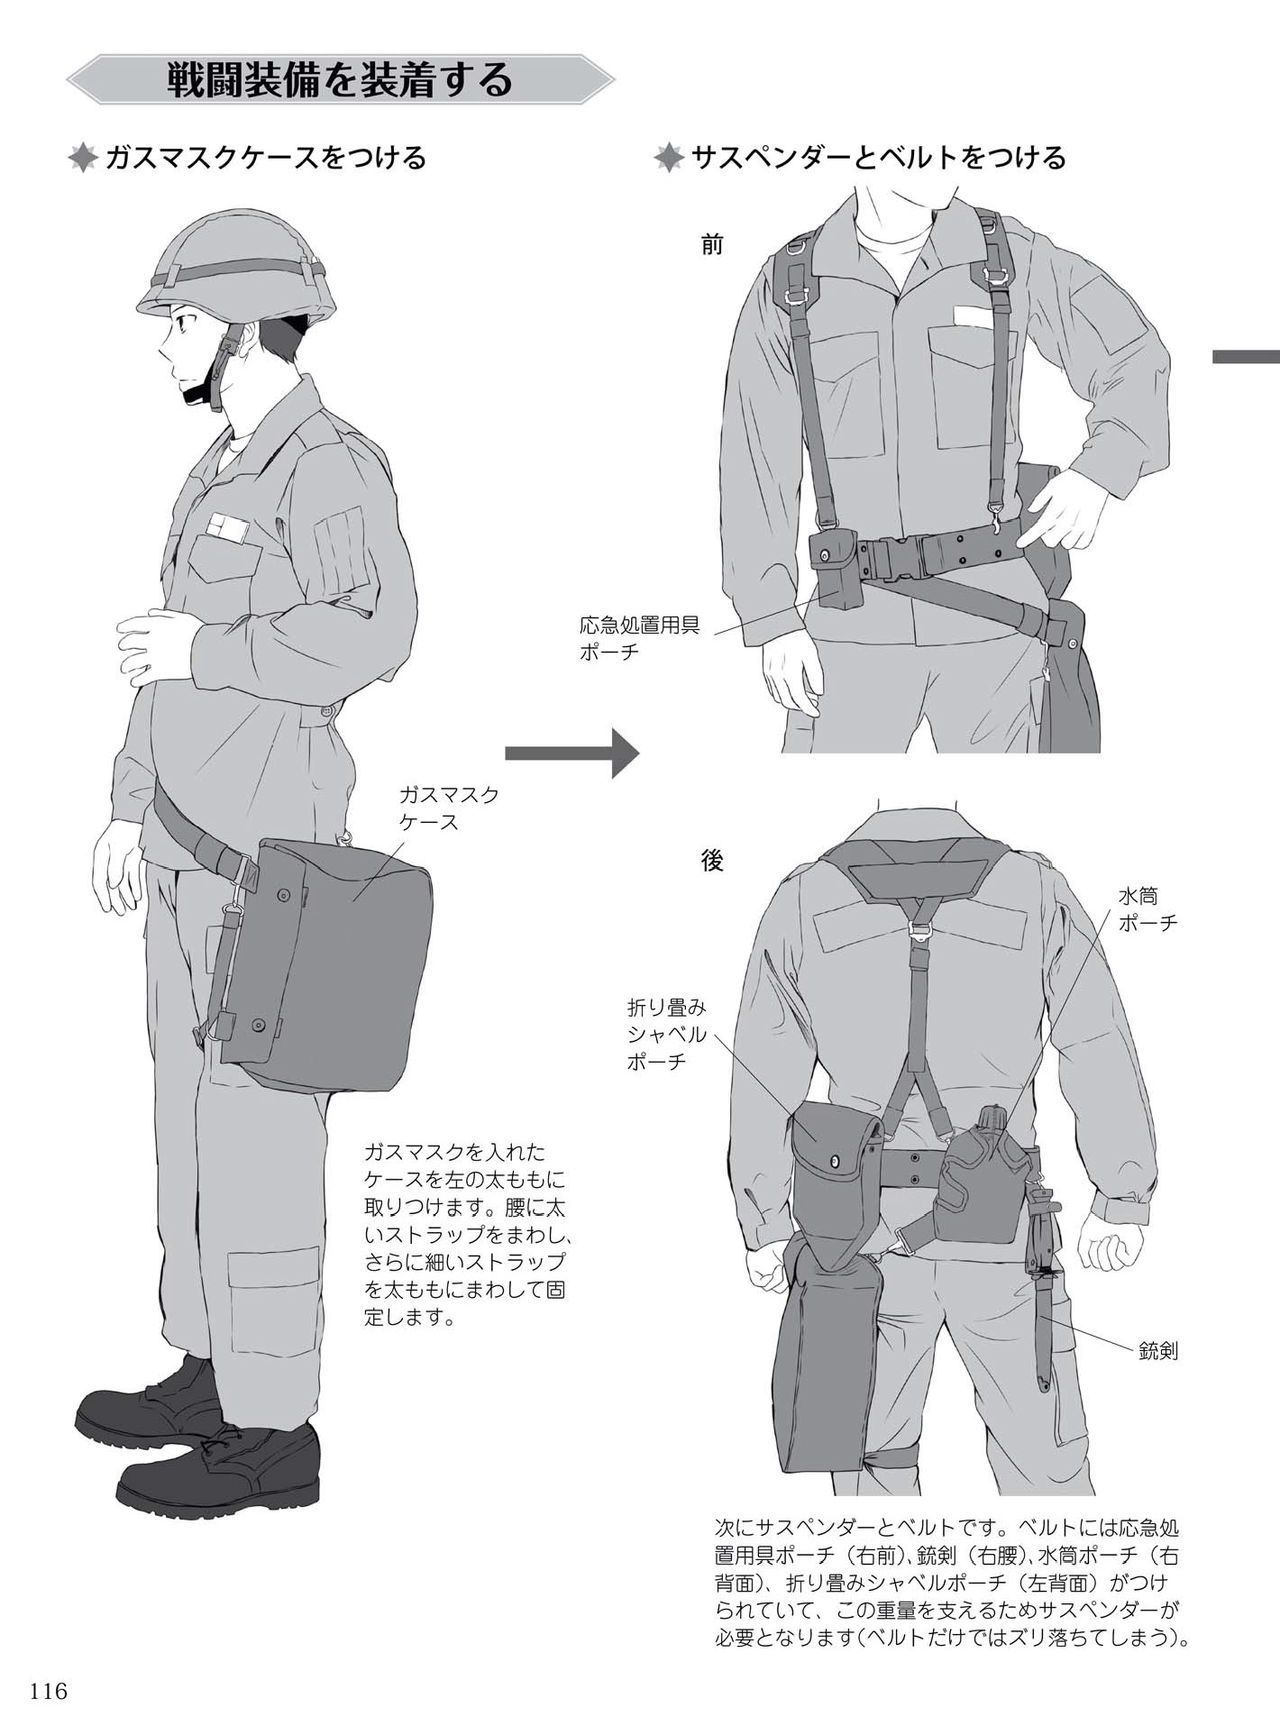 How to draw military uniforms and uniforms From Self-Defense Forces 軍服・制服の描き方 アメリカ軍・自衛隊の制服から戦闘服まで 119